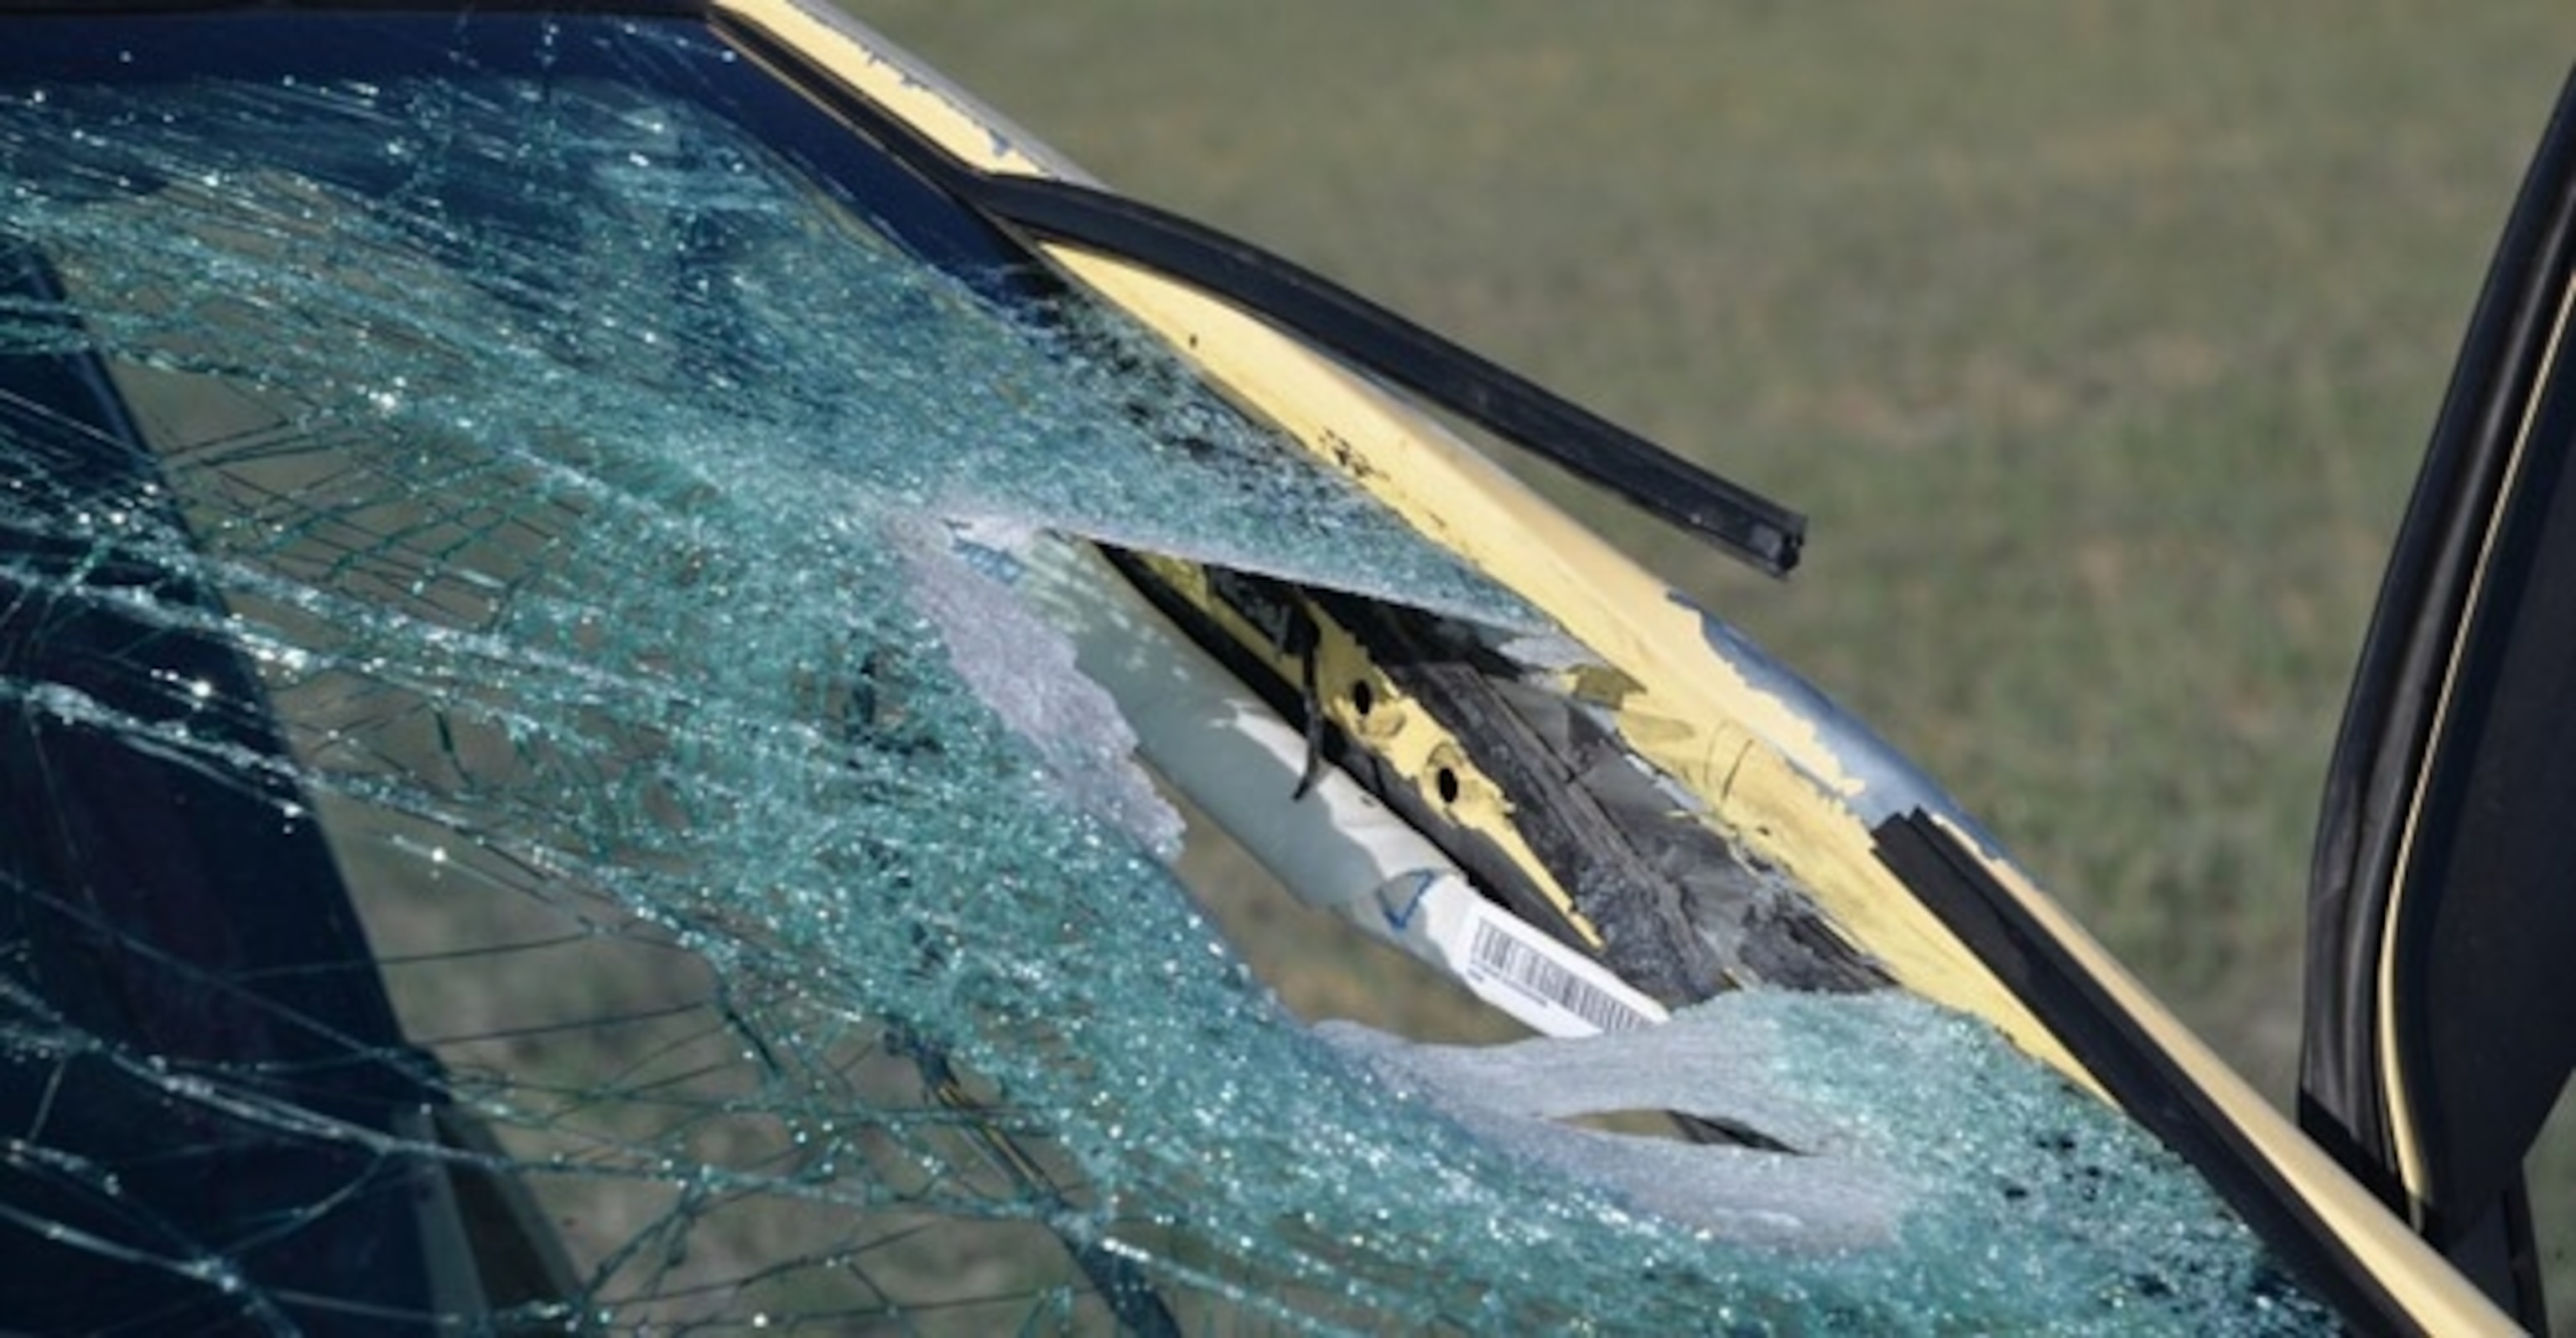 PHOTO: Damage to Alexa Bartell's car is shown after she was fatally injured by a rock, on April 19, 2023.